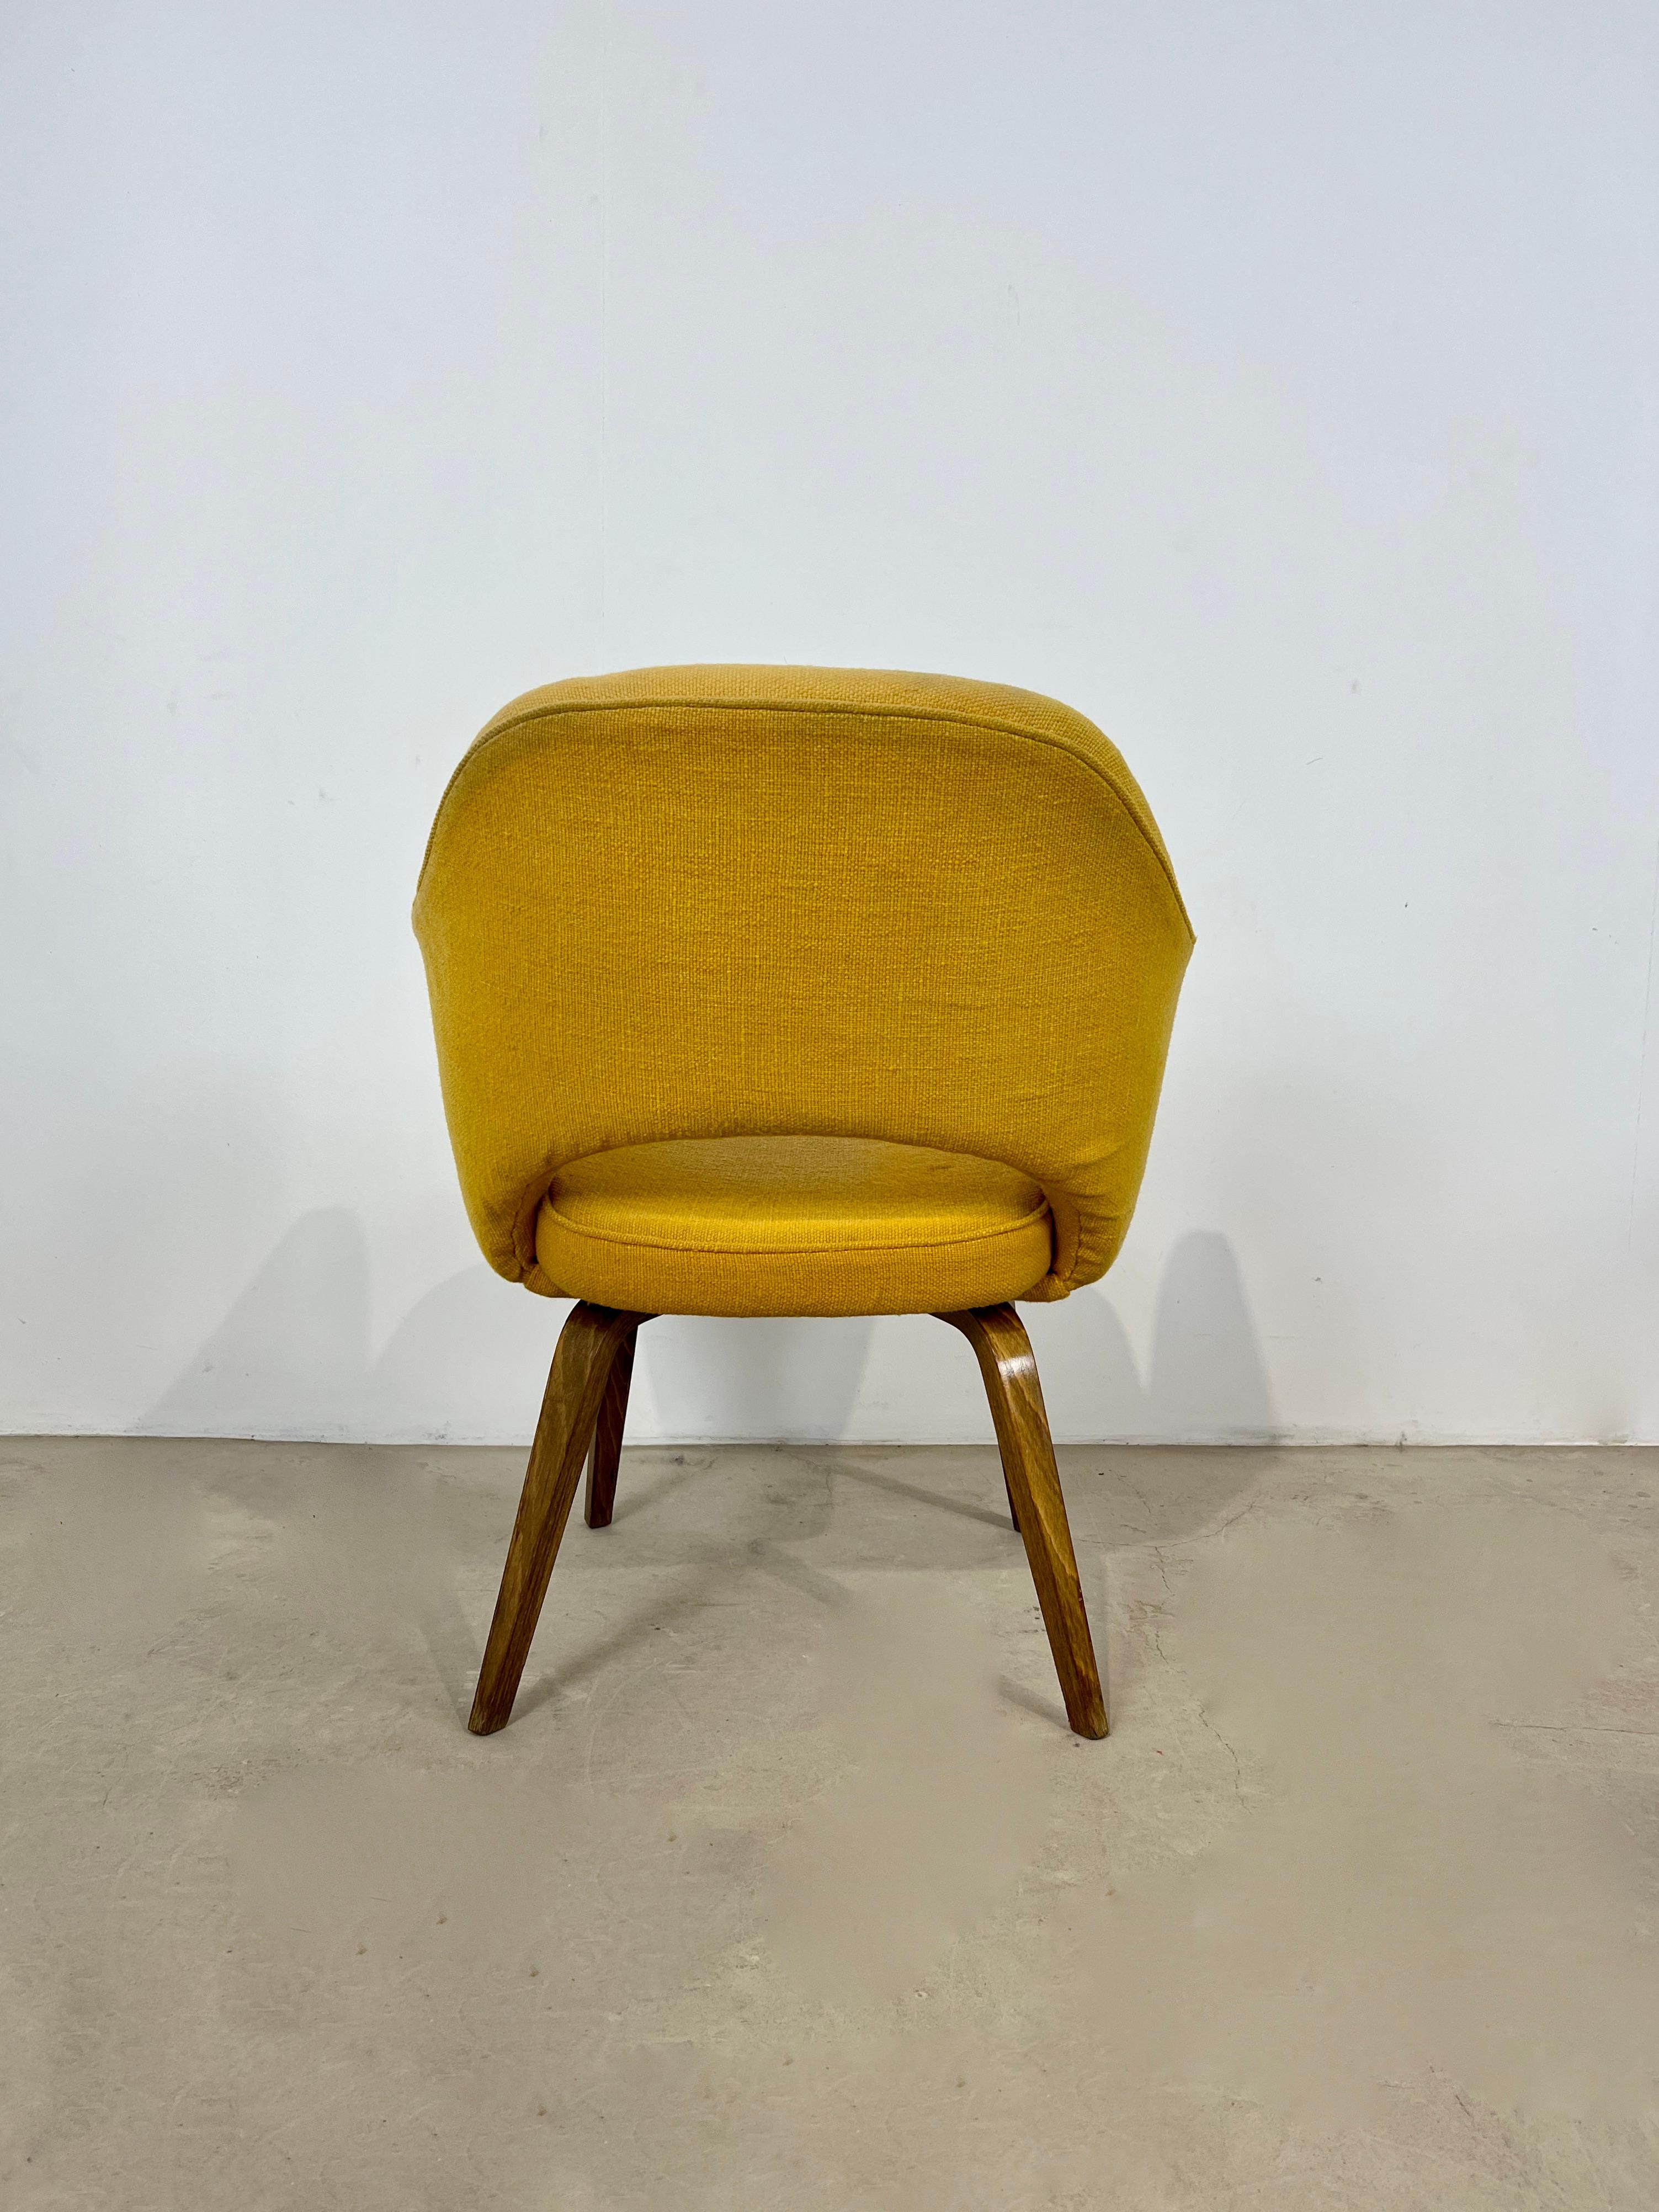 Executive Armchair by Eero Saarinen for Knoll Inc. / Knoll International, 1960s In Good Condition For Sale In Lasne, BE